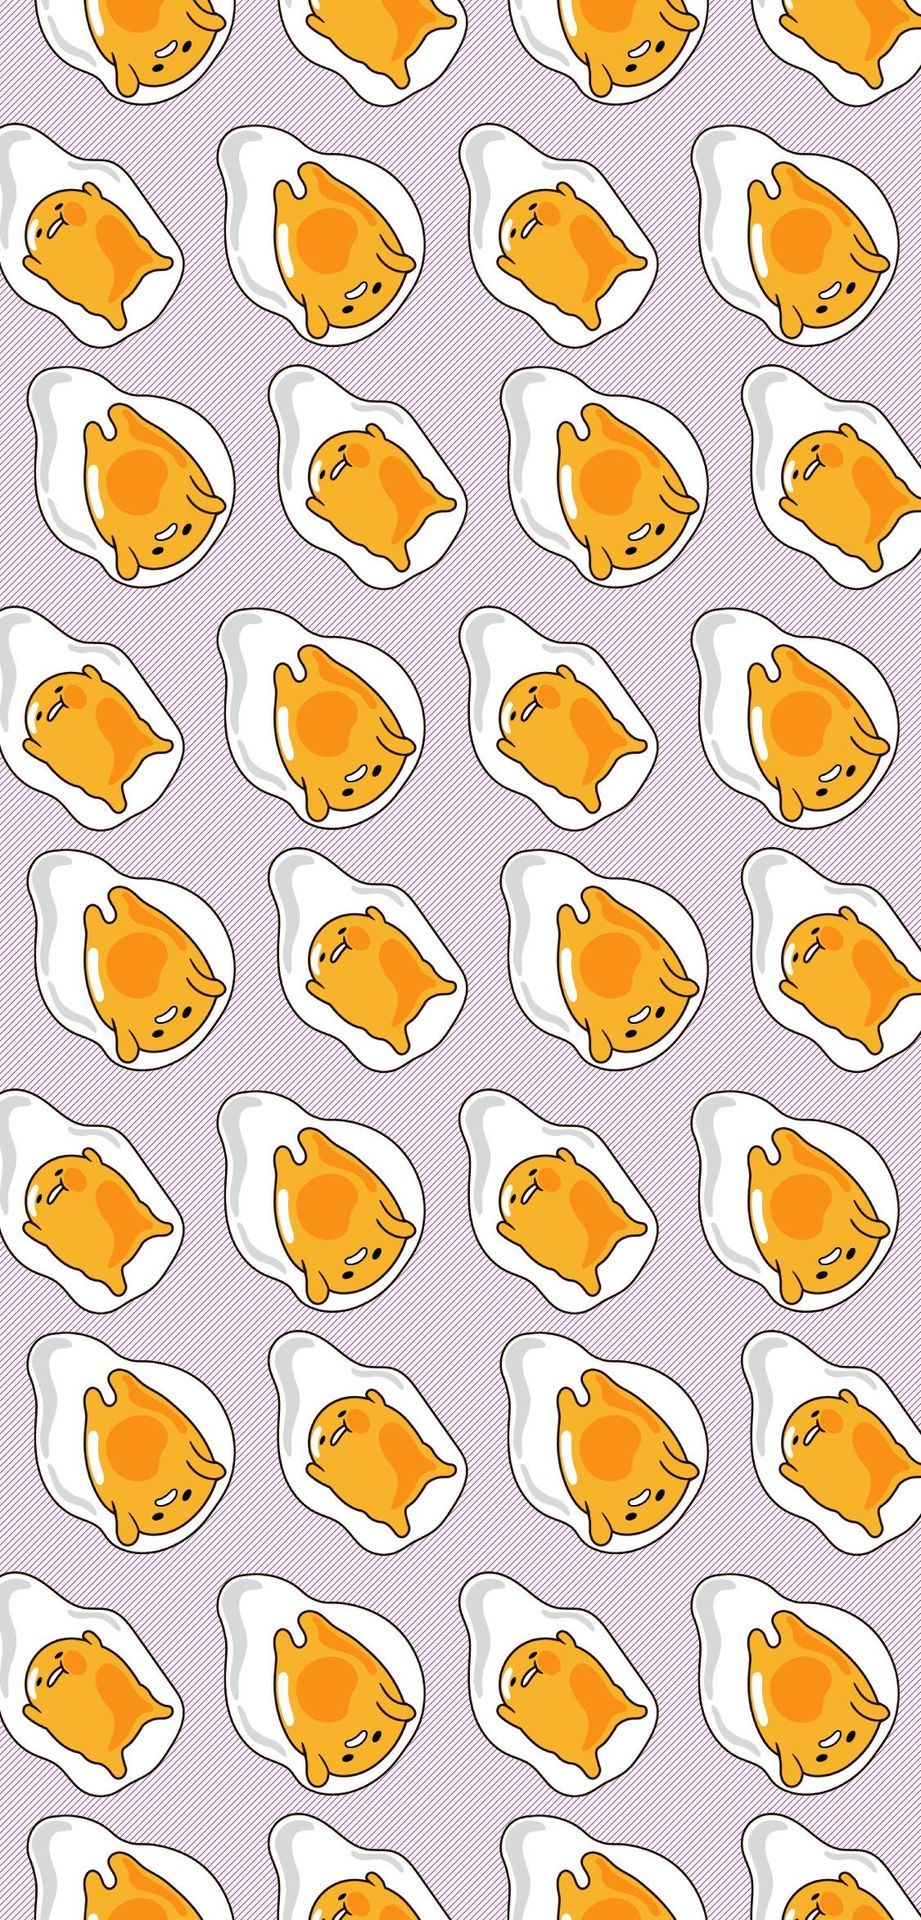 Gudetama the lazy egg wallpaper for iPhone and Android phone - Gudetama